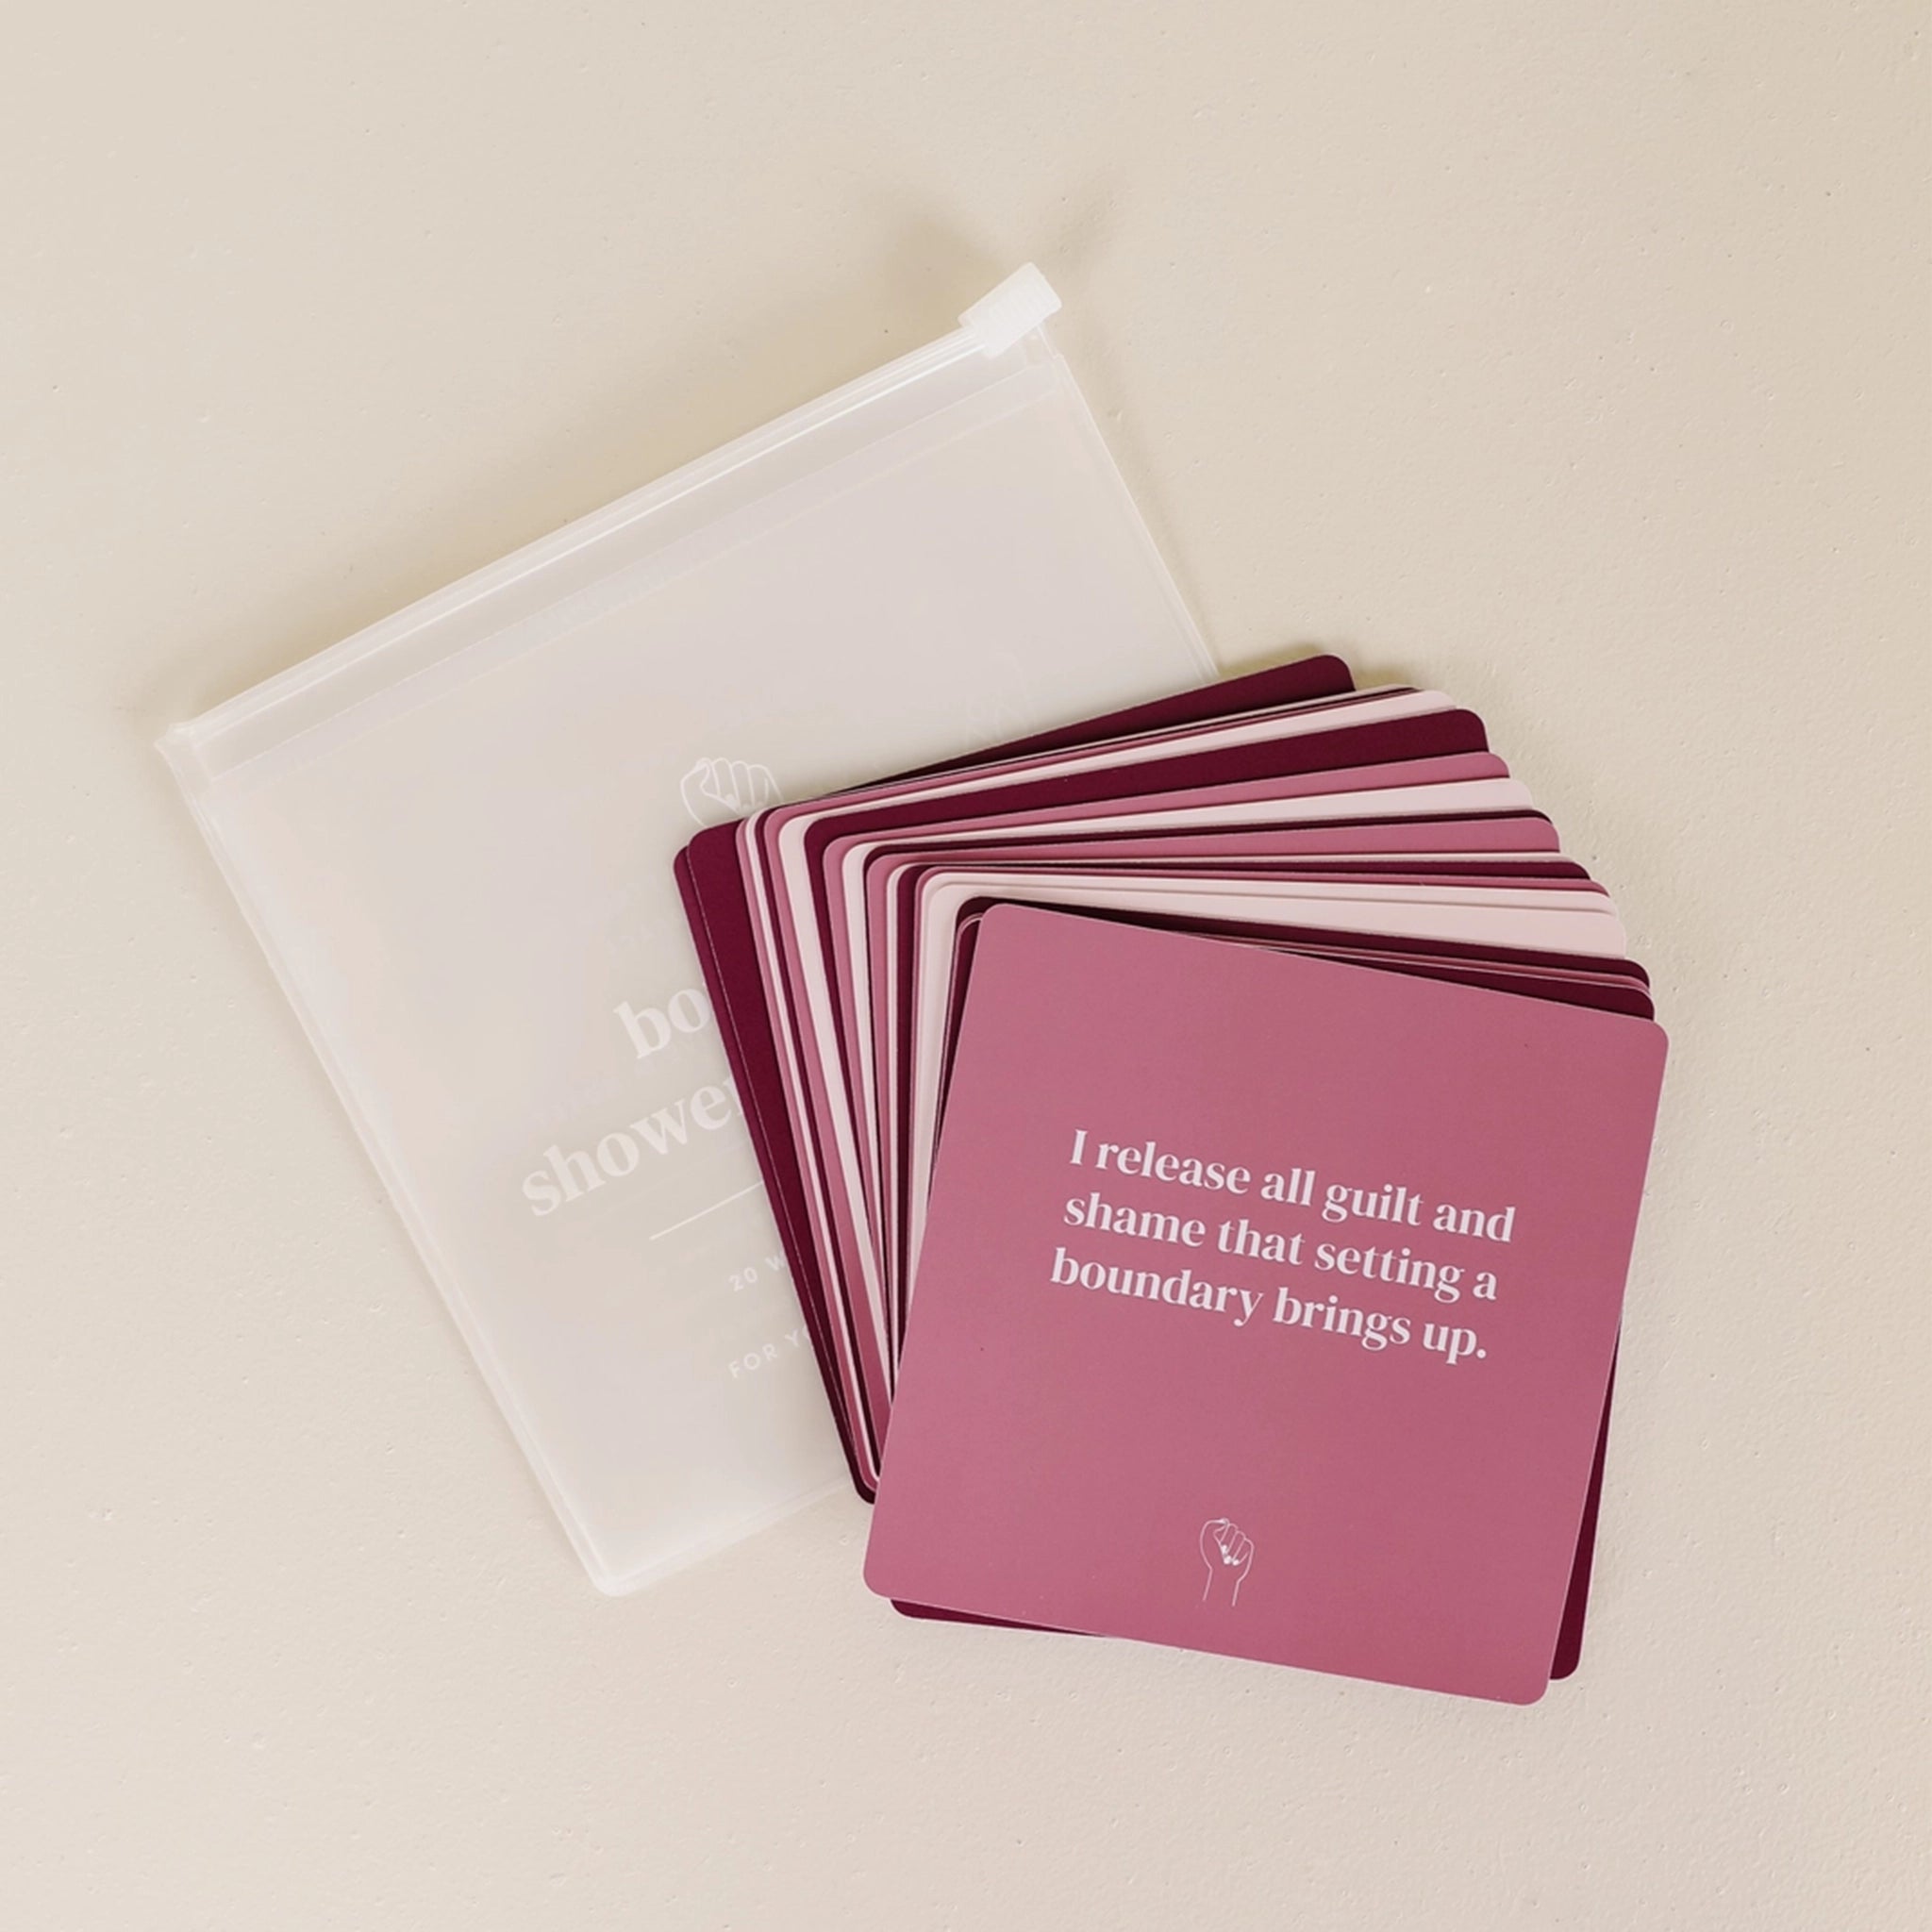 Different shades of purple cards with affirmations on the theme of boundaries that stick to your shower wall when wet.